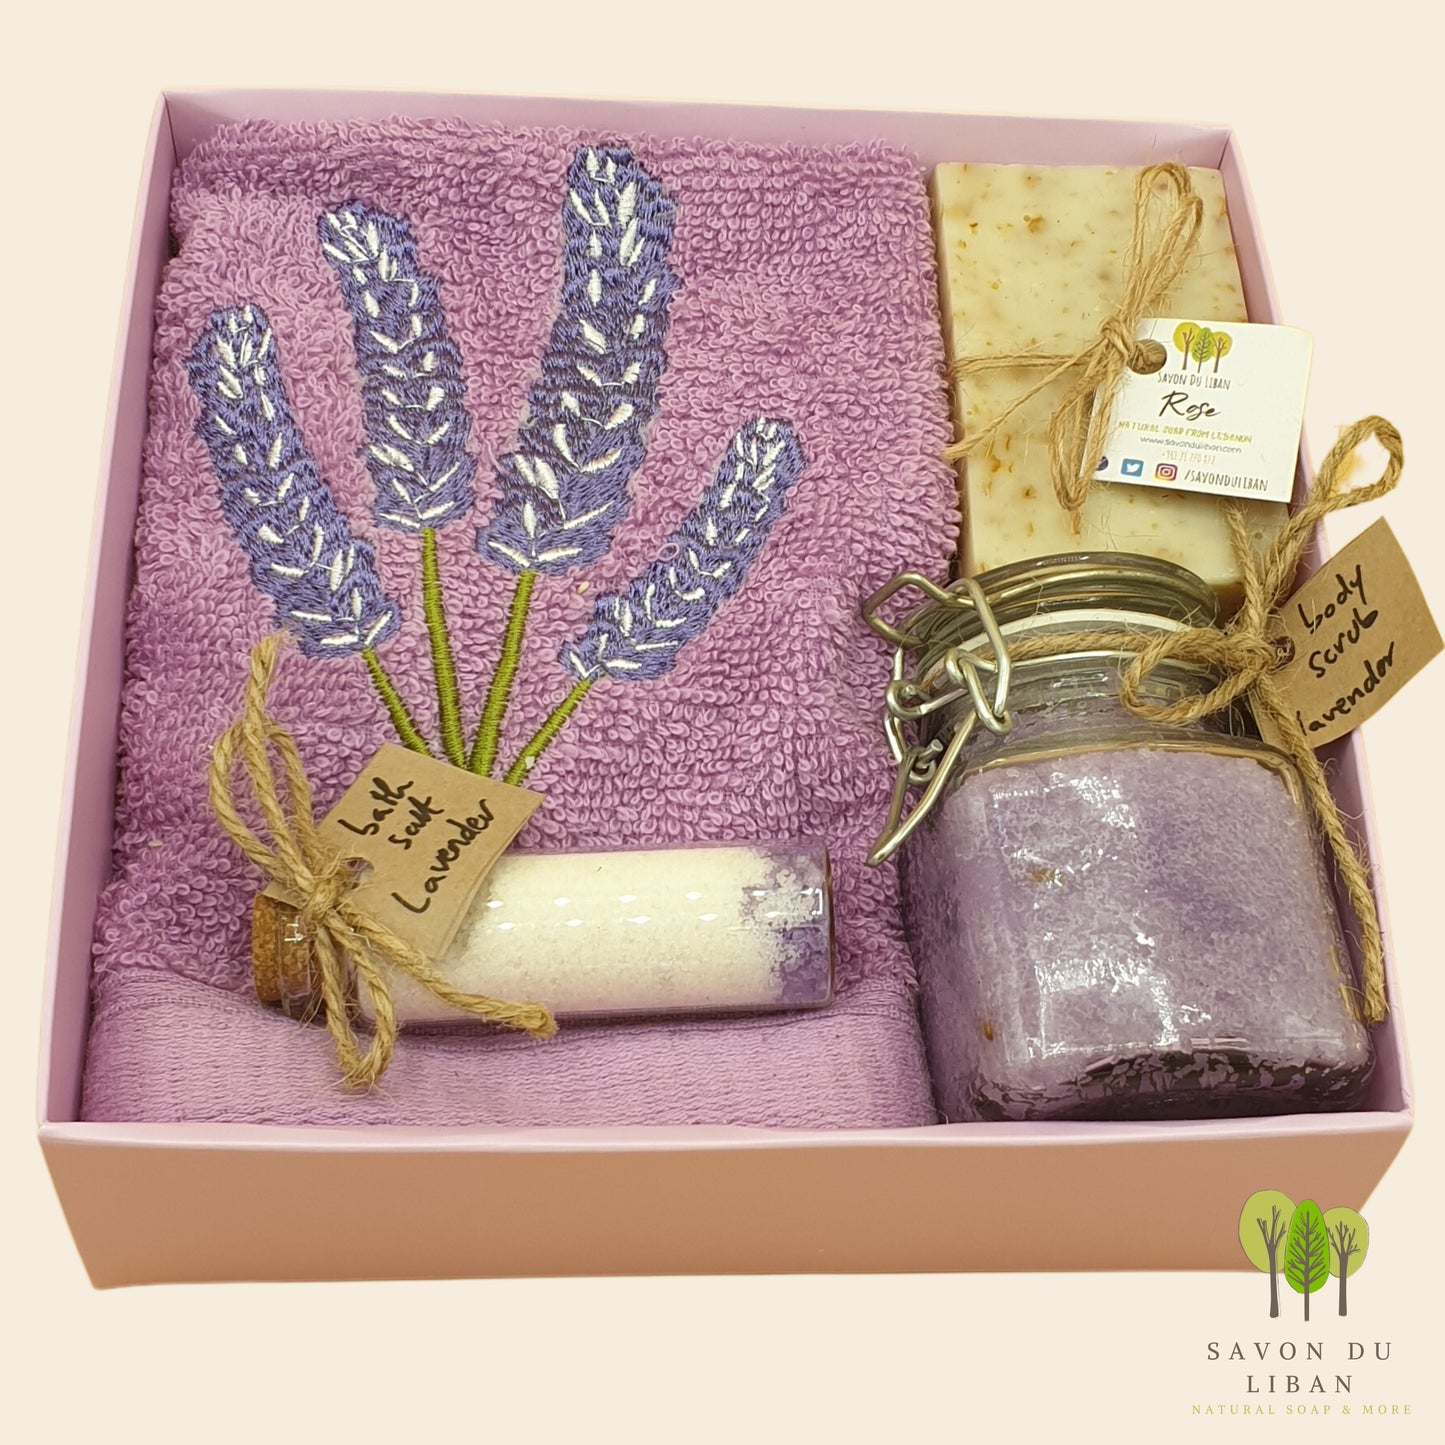 "The Lavender Luxe Teaser" Gift Set